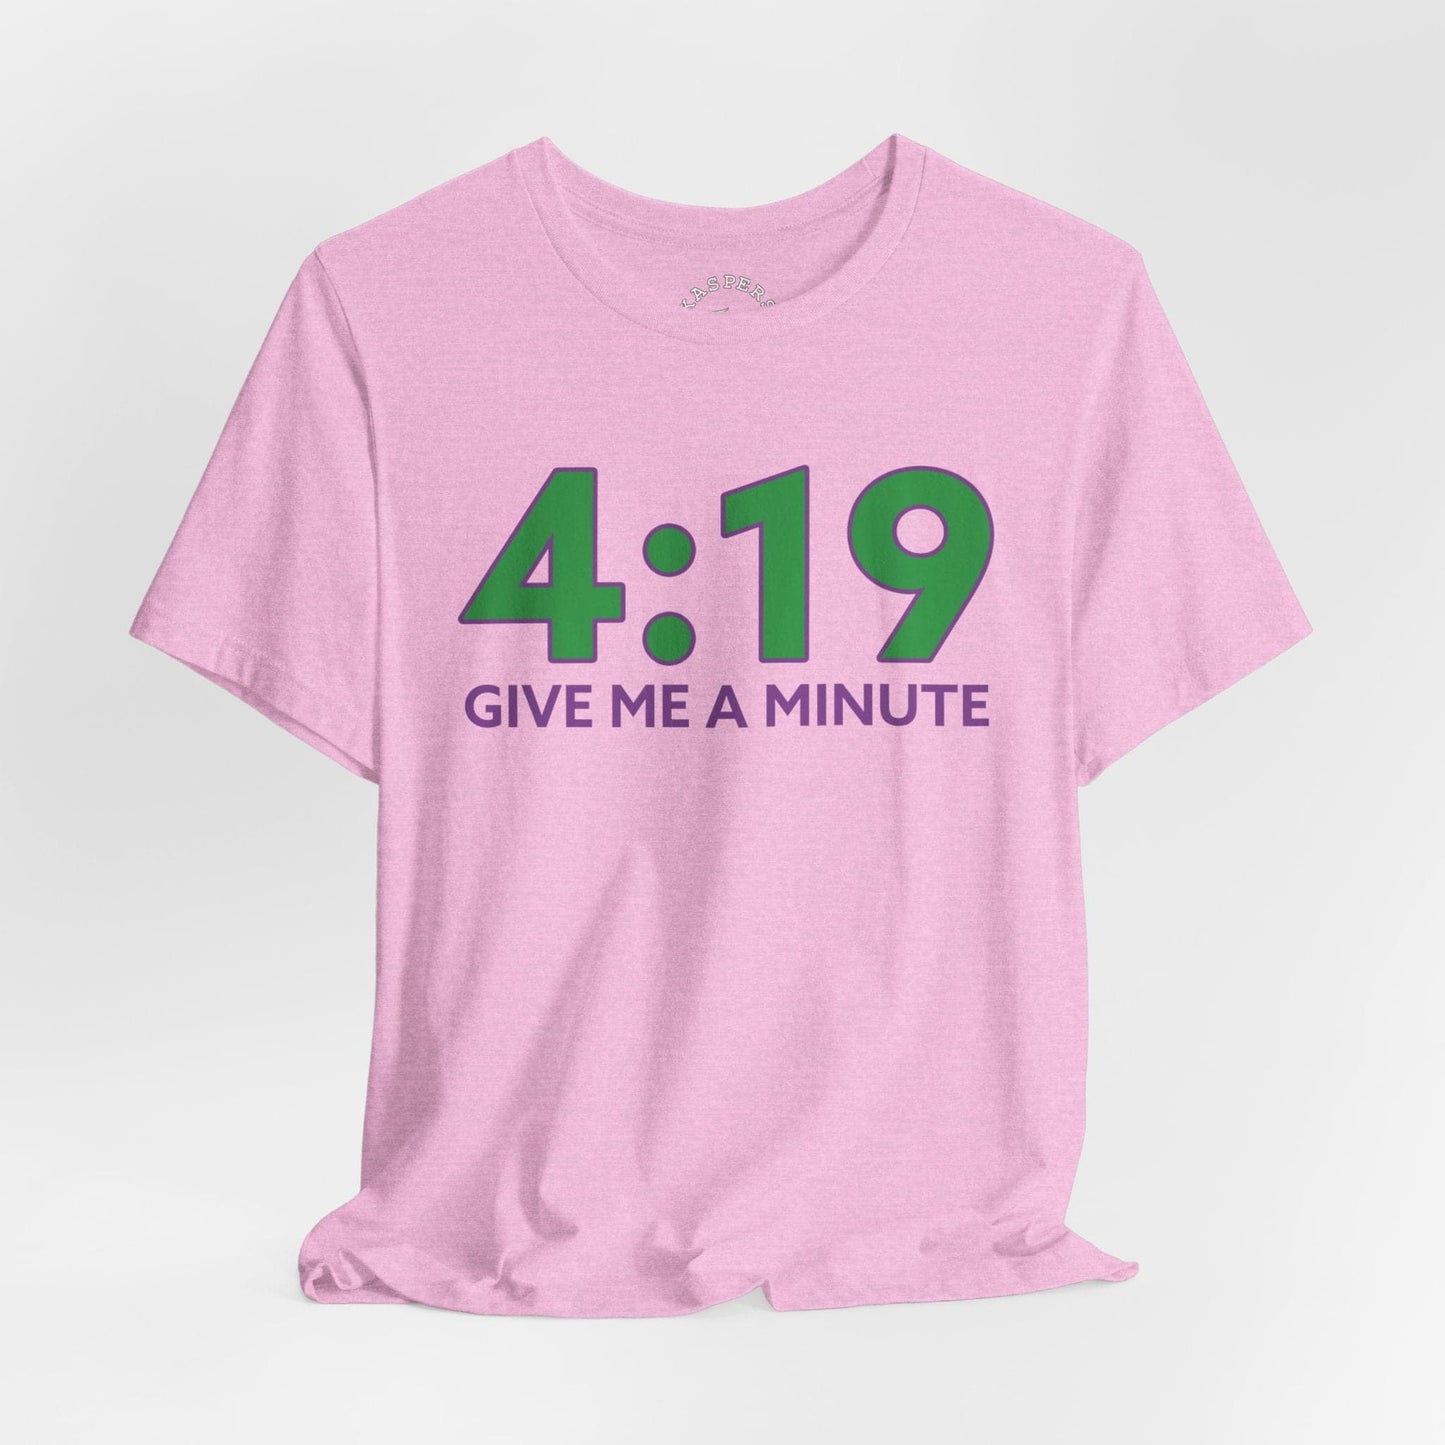 4:19 Give Me A Minute T-Shirt